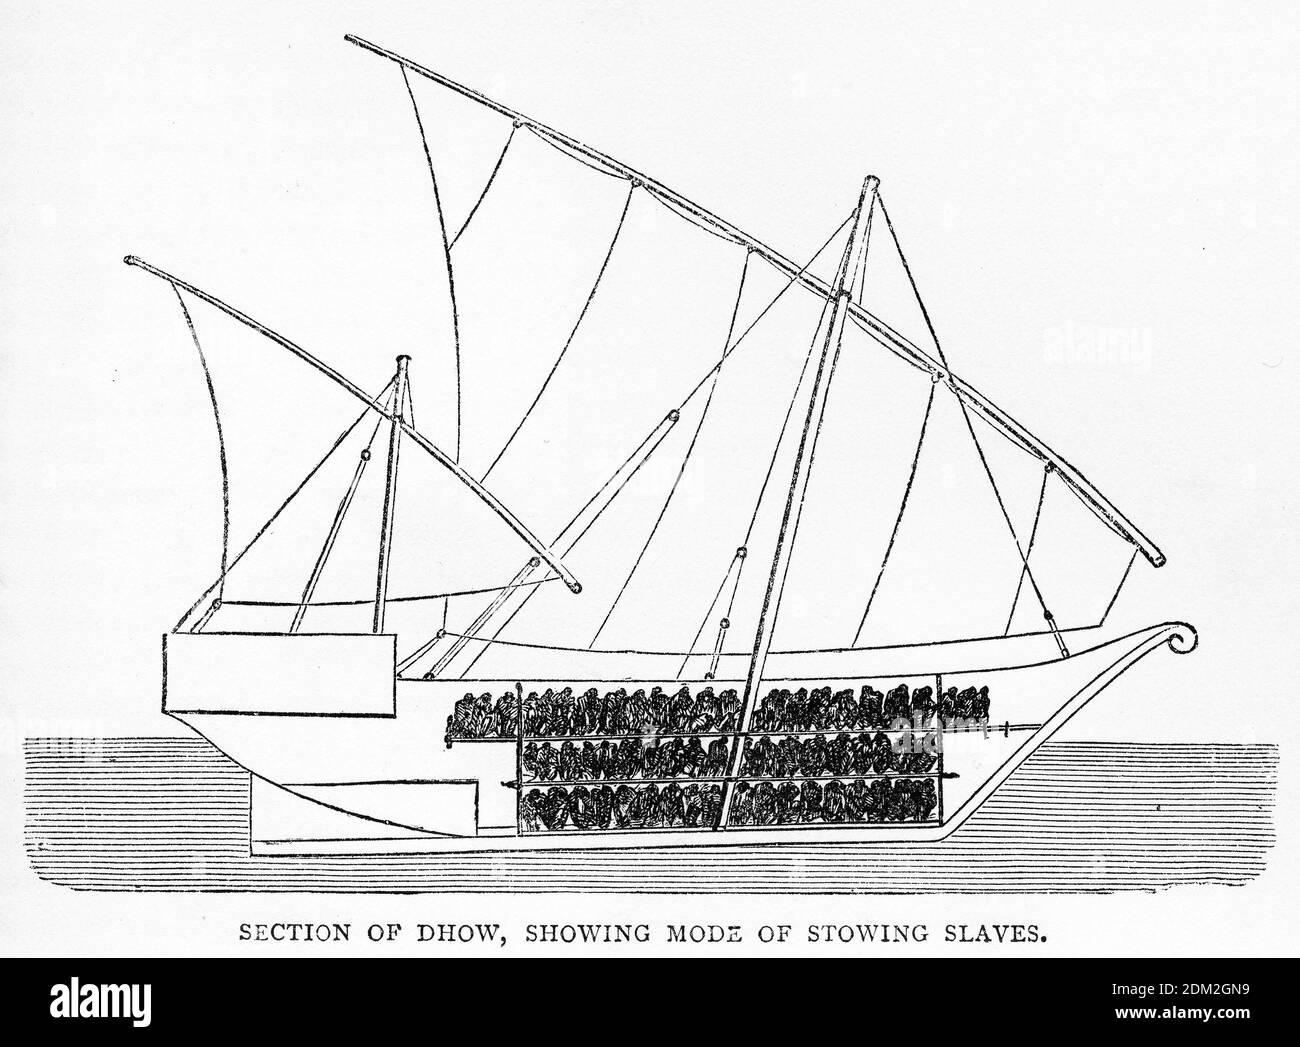 Engraving of a cross-section of an Arab dhow carrying slaves below decks Stock Photo